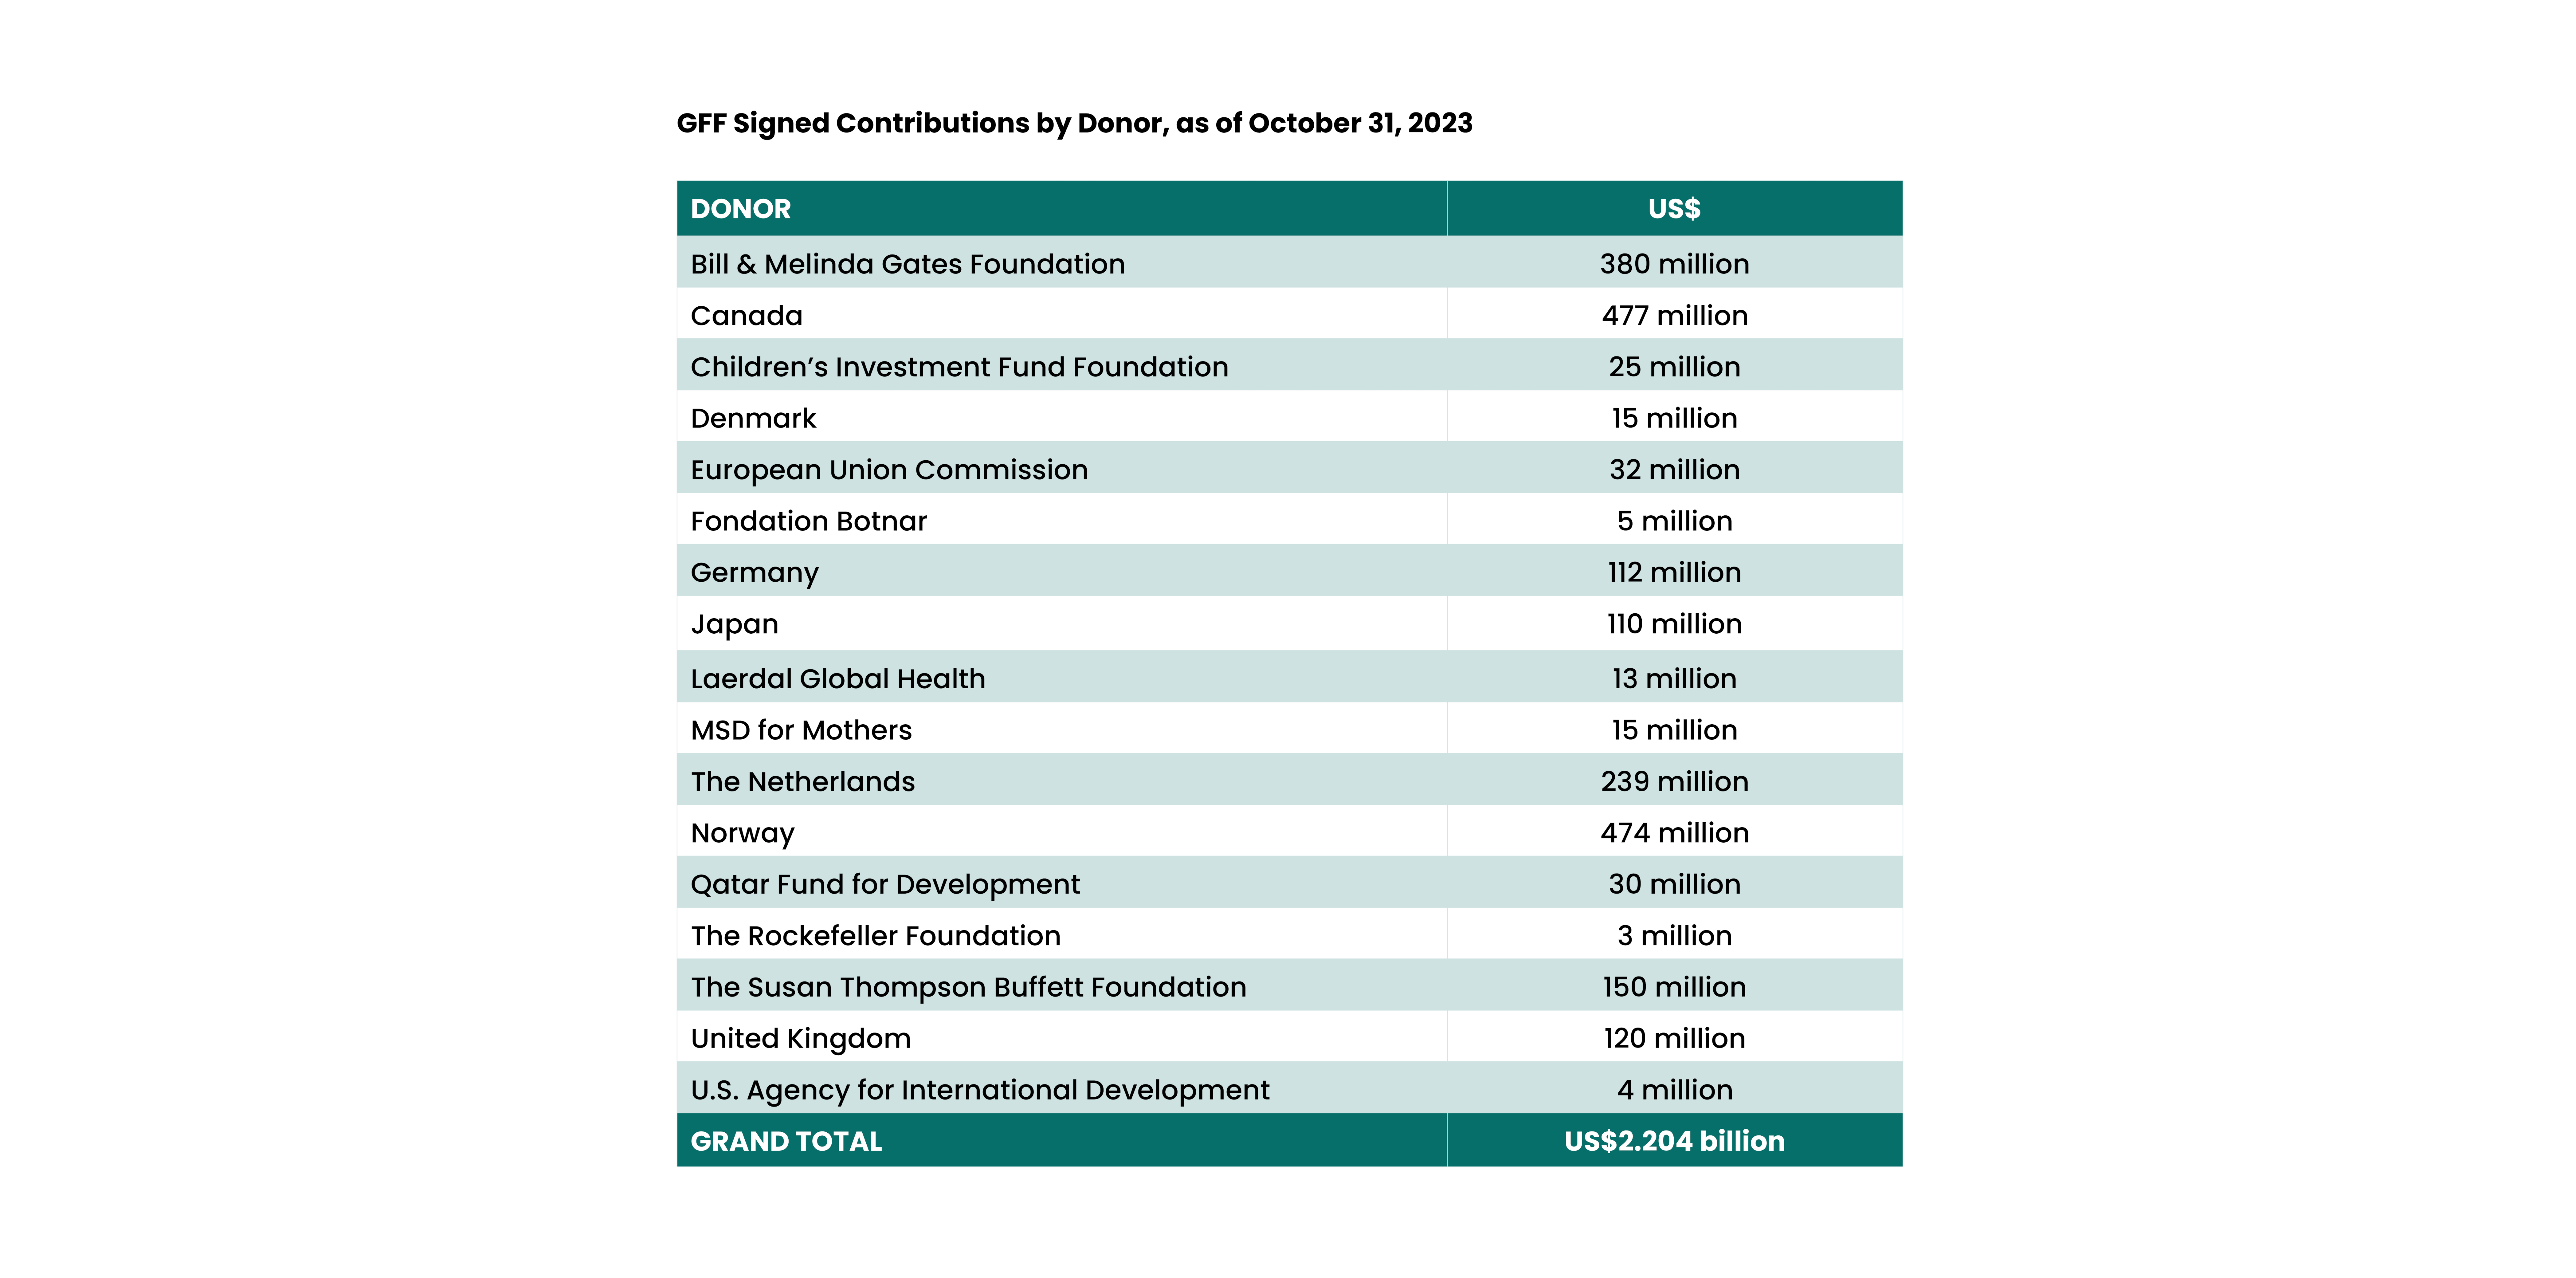 GFF Signed Contributions by Donor, as of October 31, 2023